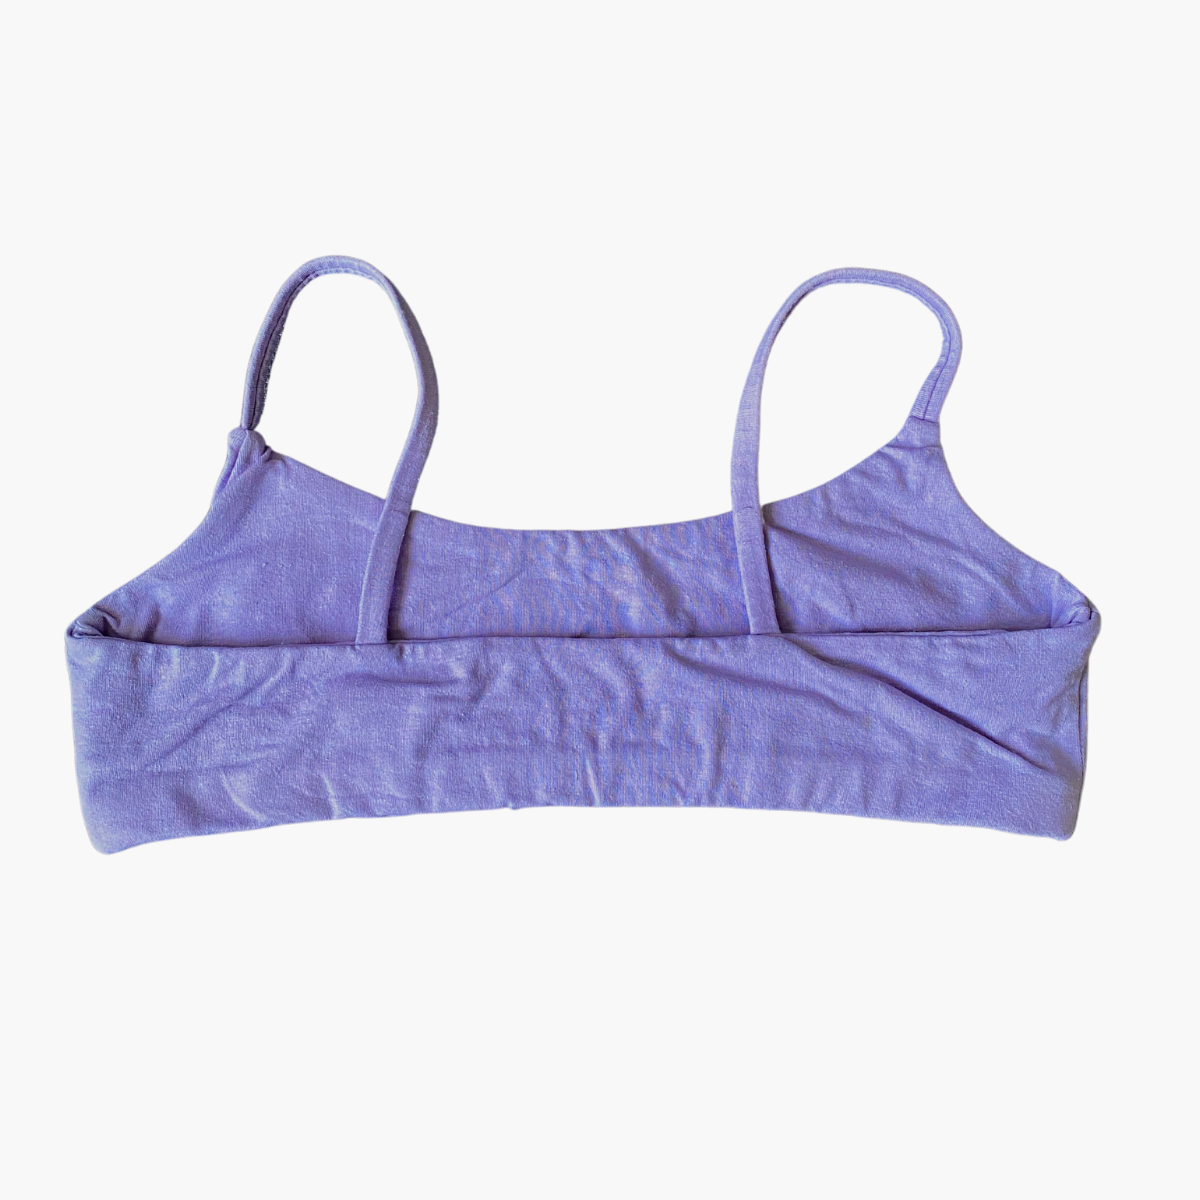 Bralette (Limited edition)